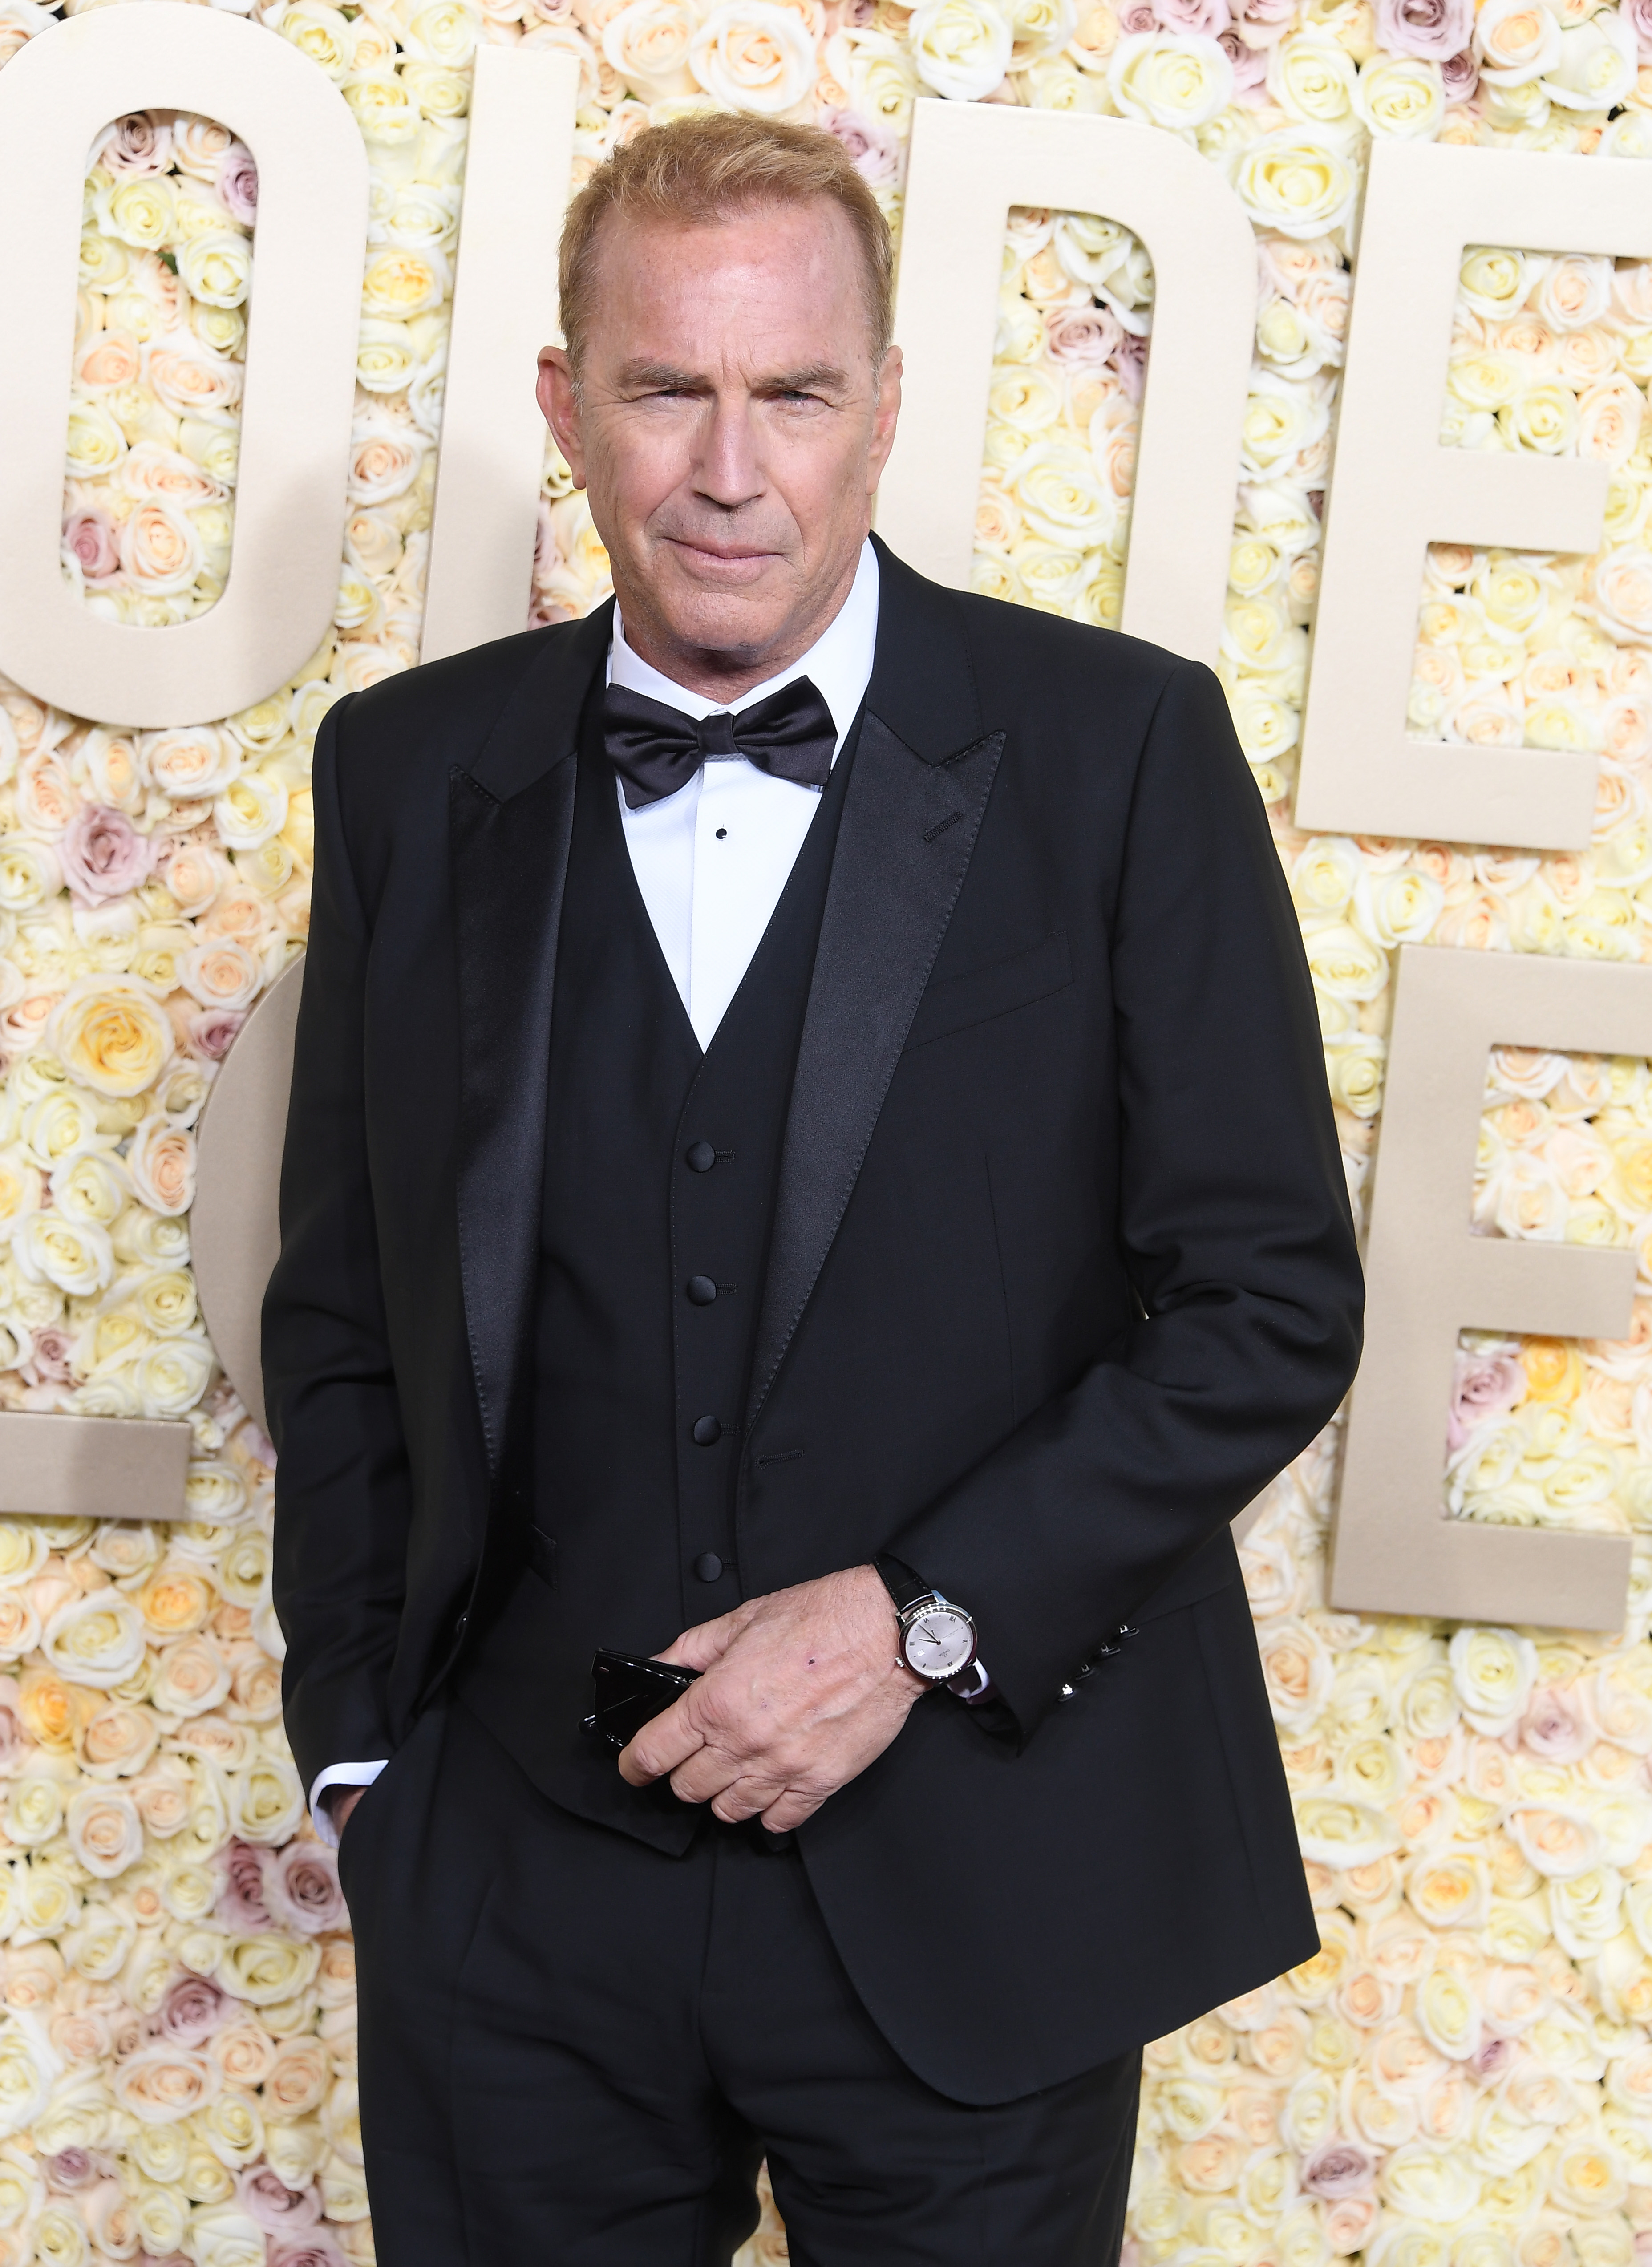 Kevin Costner poses at the Golden Globe awards in Los Angeles in January